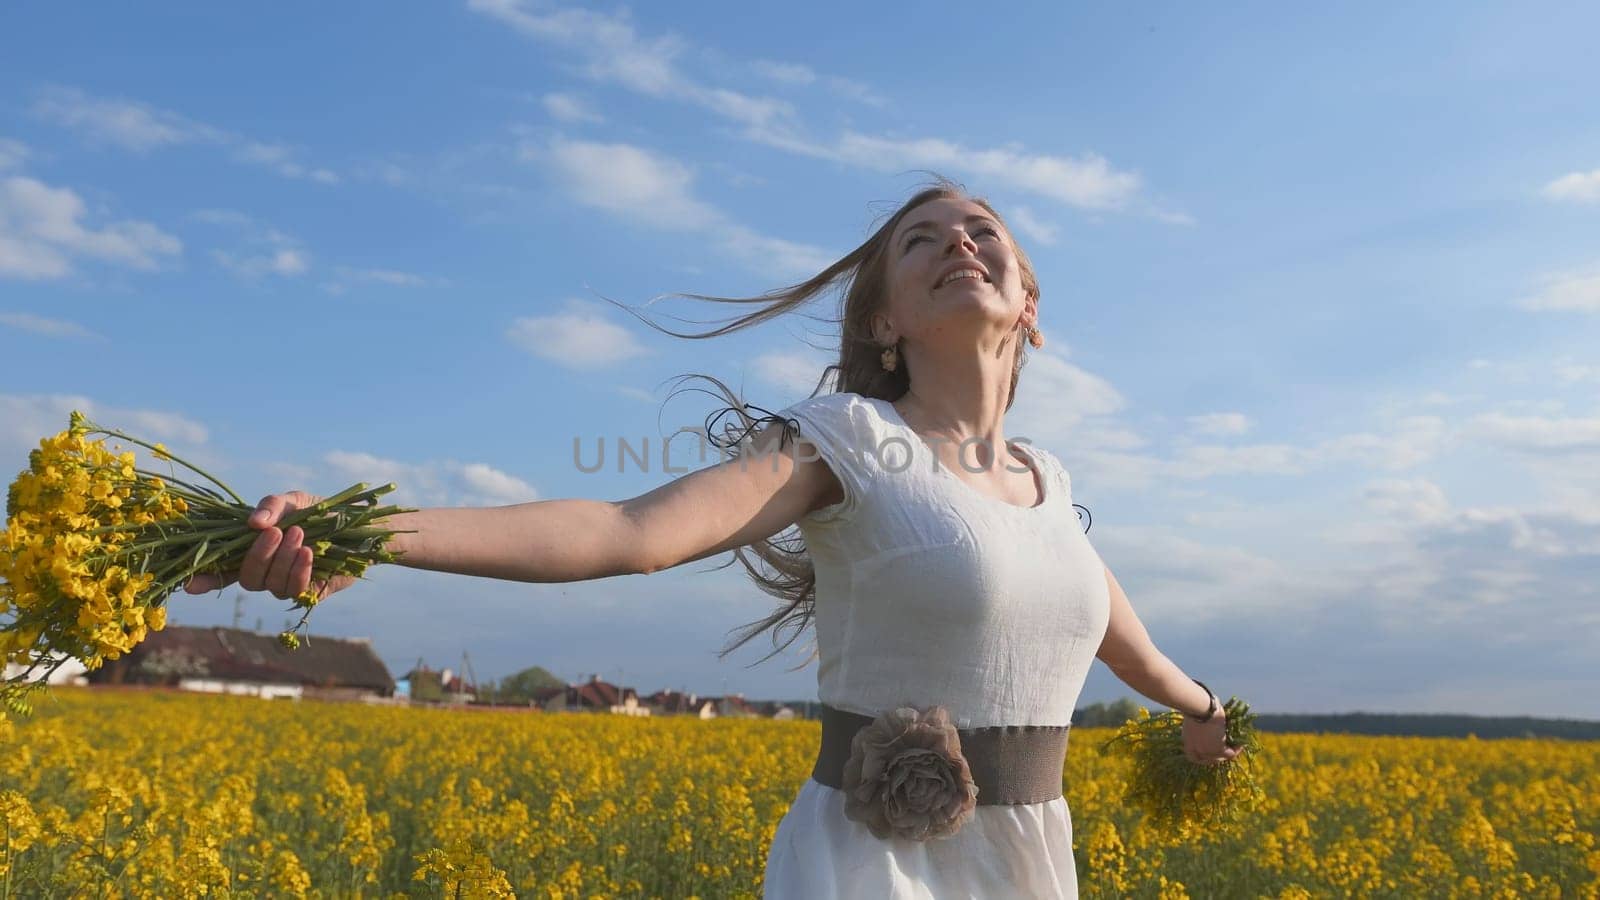 Happy girl in a white dress with a bouquet of rapeseed flowers in a yellow rapeseed field